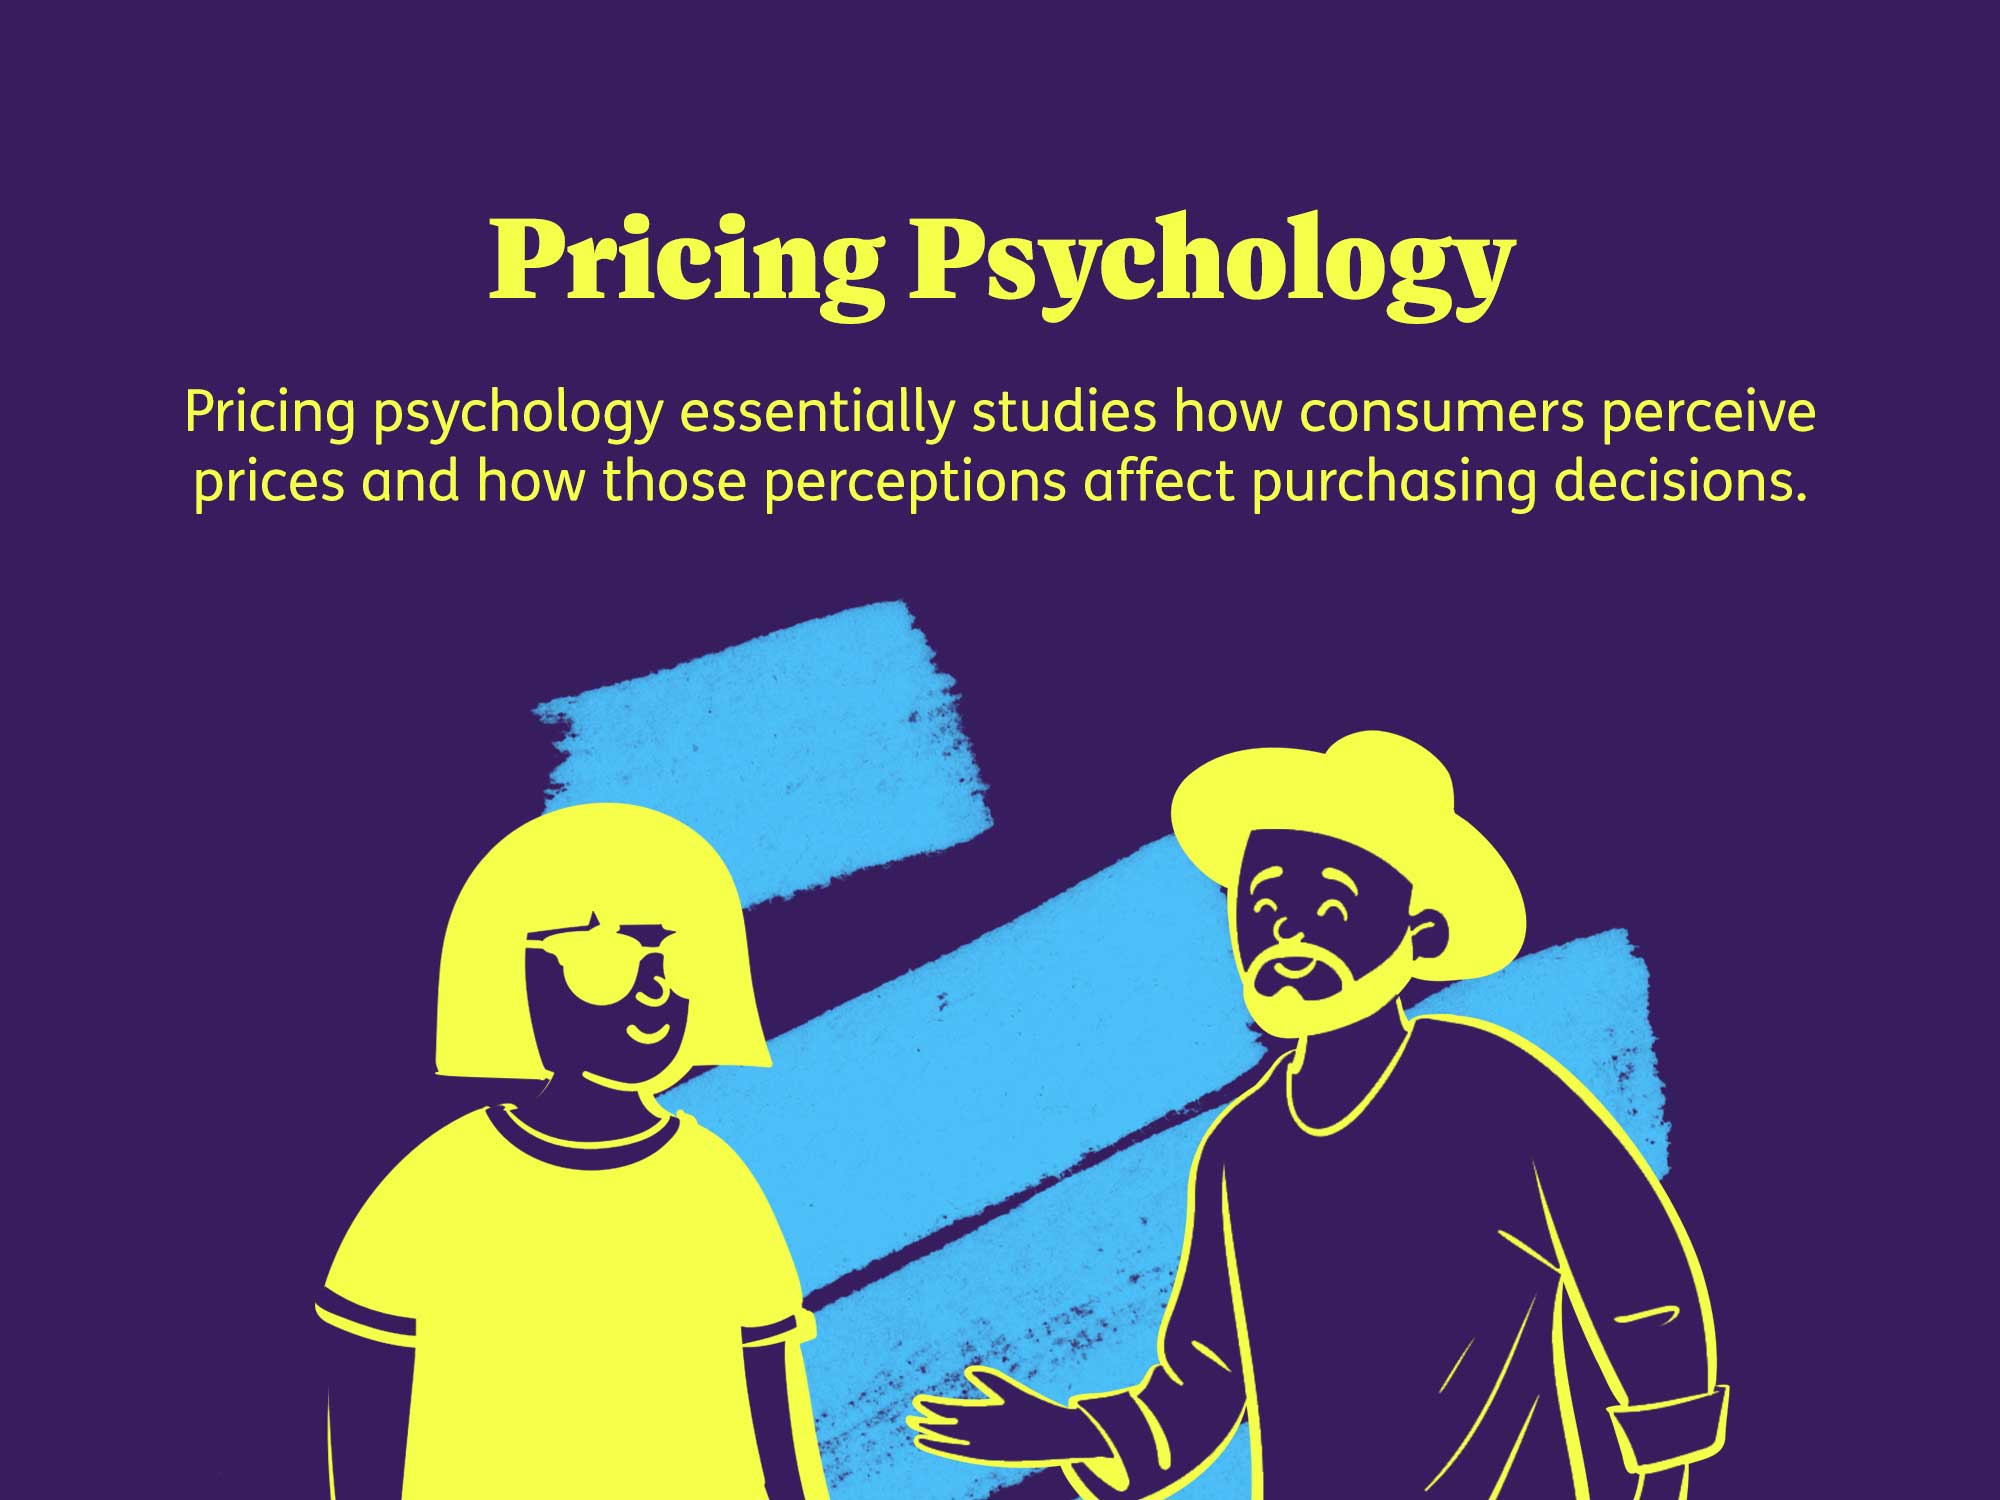 Pricing psychology essentially studies how consumers perceive prices and how those perceptions affect purchasing decisions.